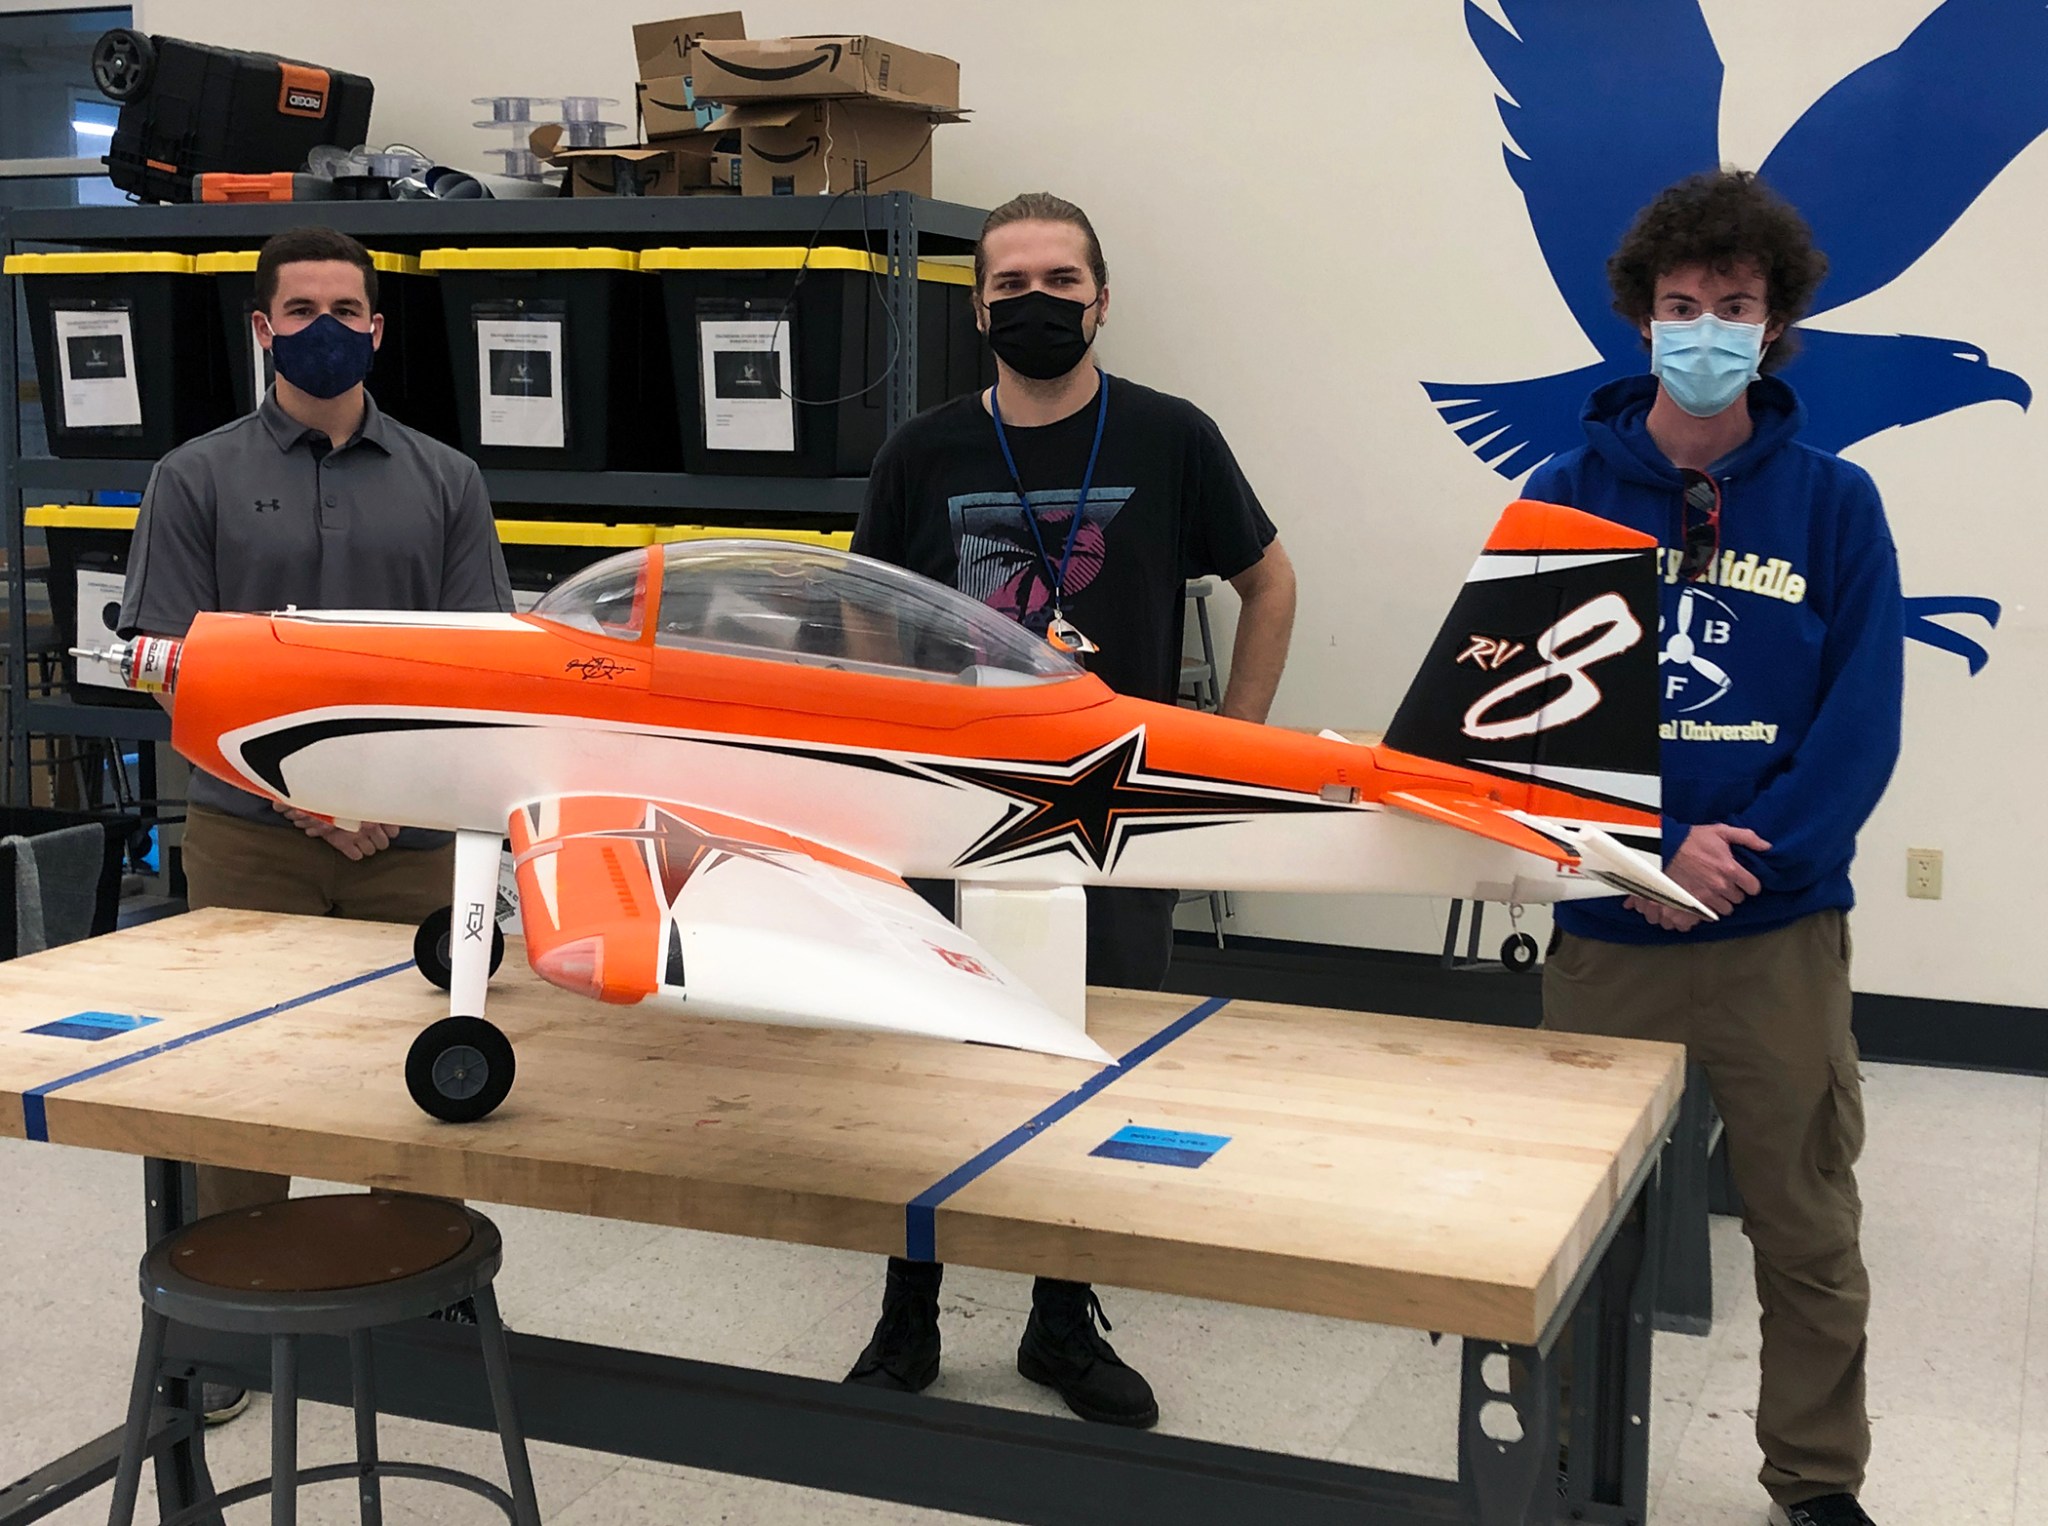 A team of student researchers from Embry Riddle Aeronautical University behind an unmanned drone.